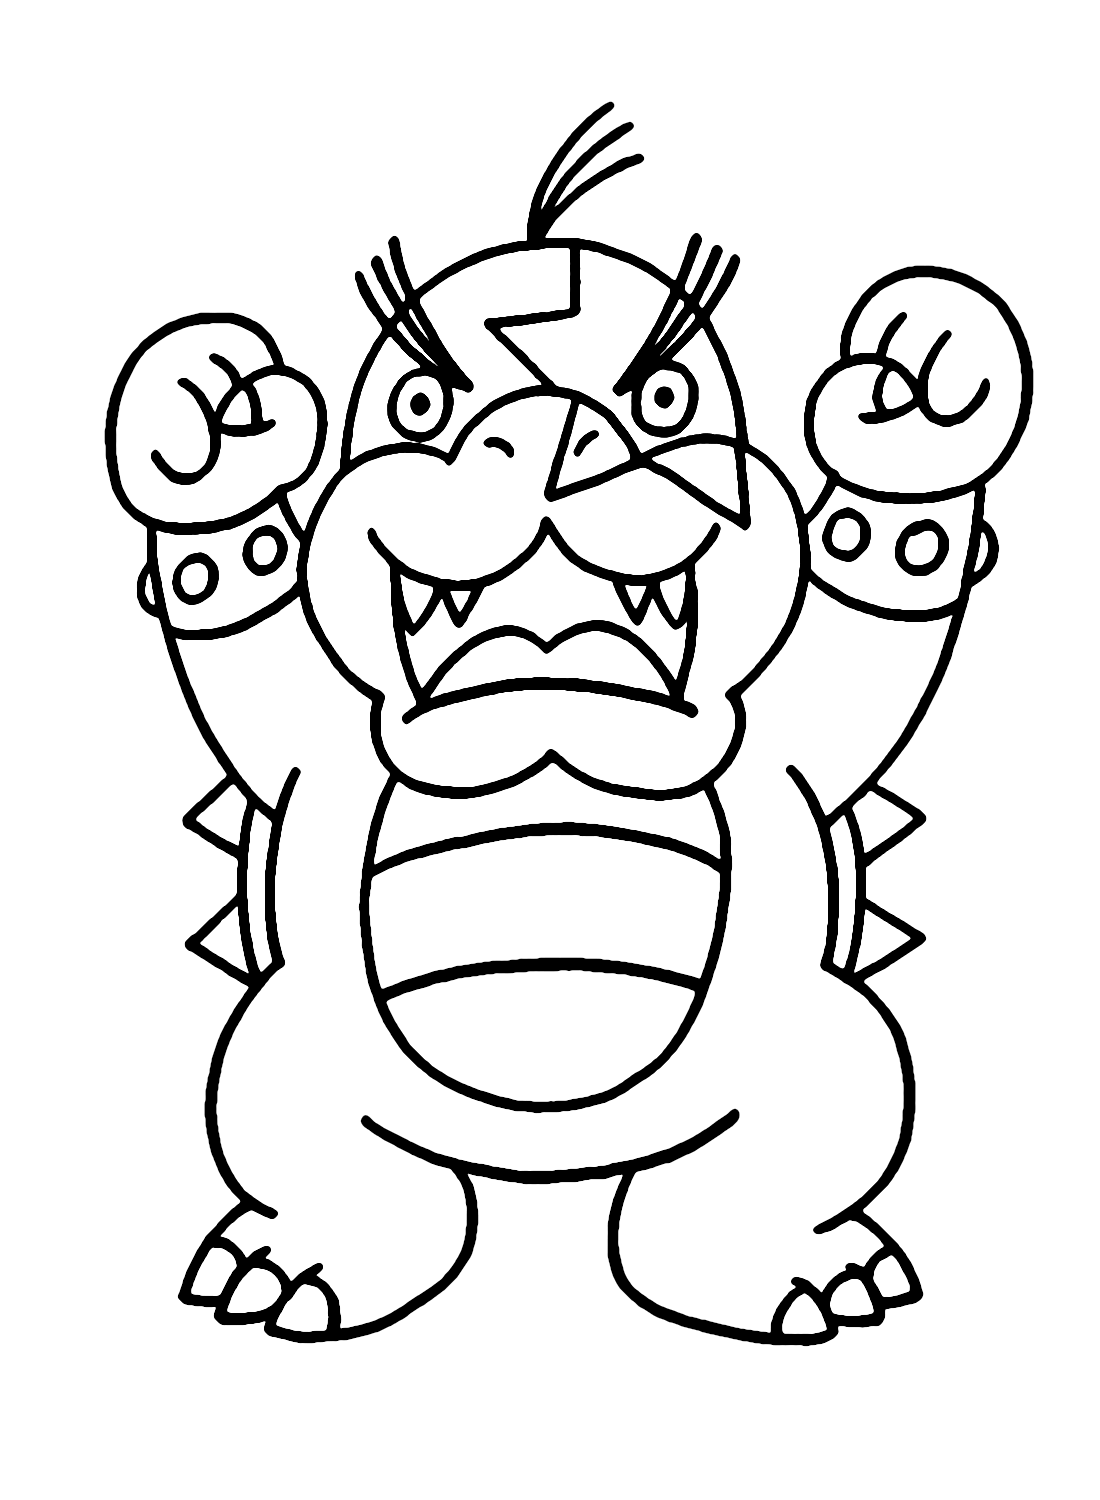 Morton Koopa from Super Mario Coloring Pages